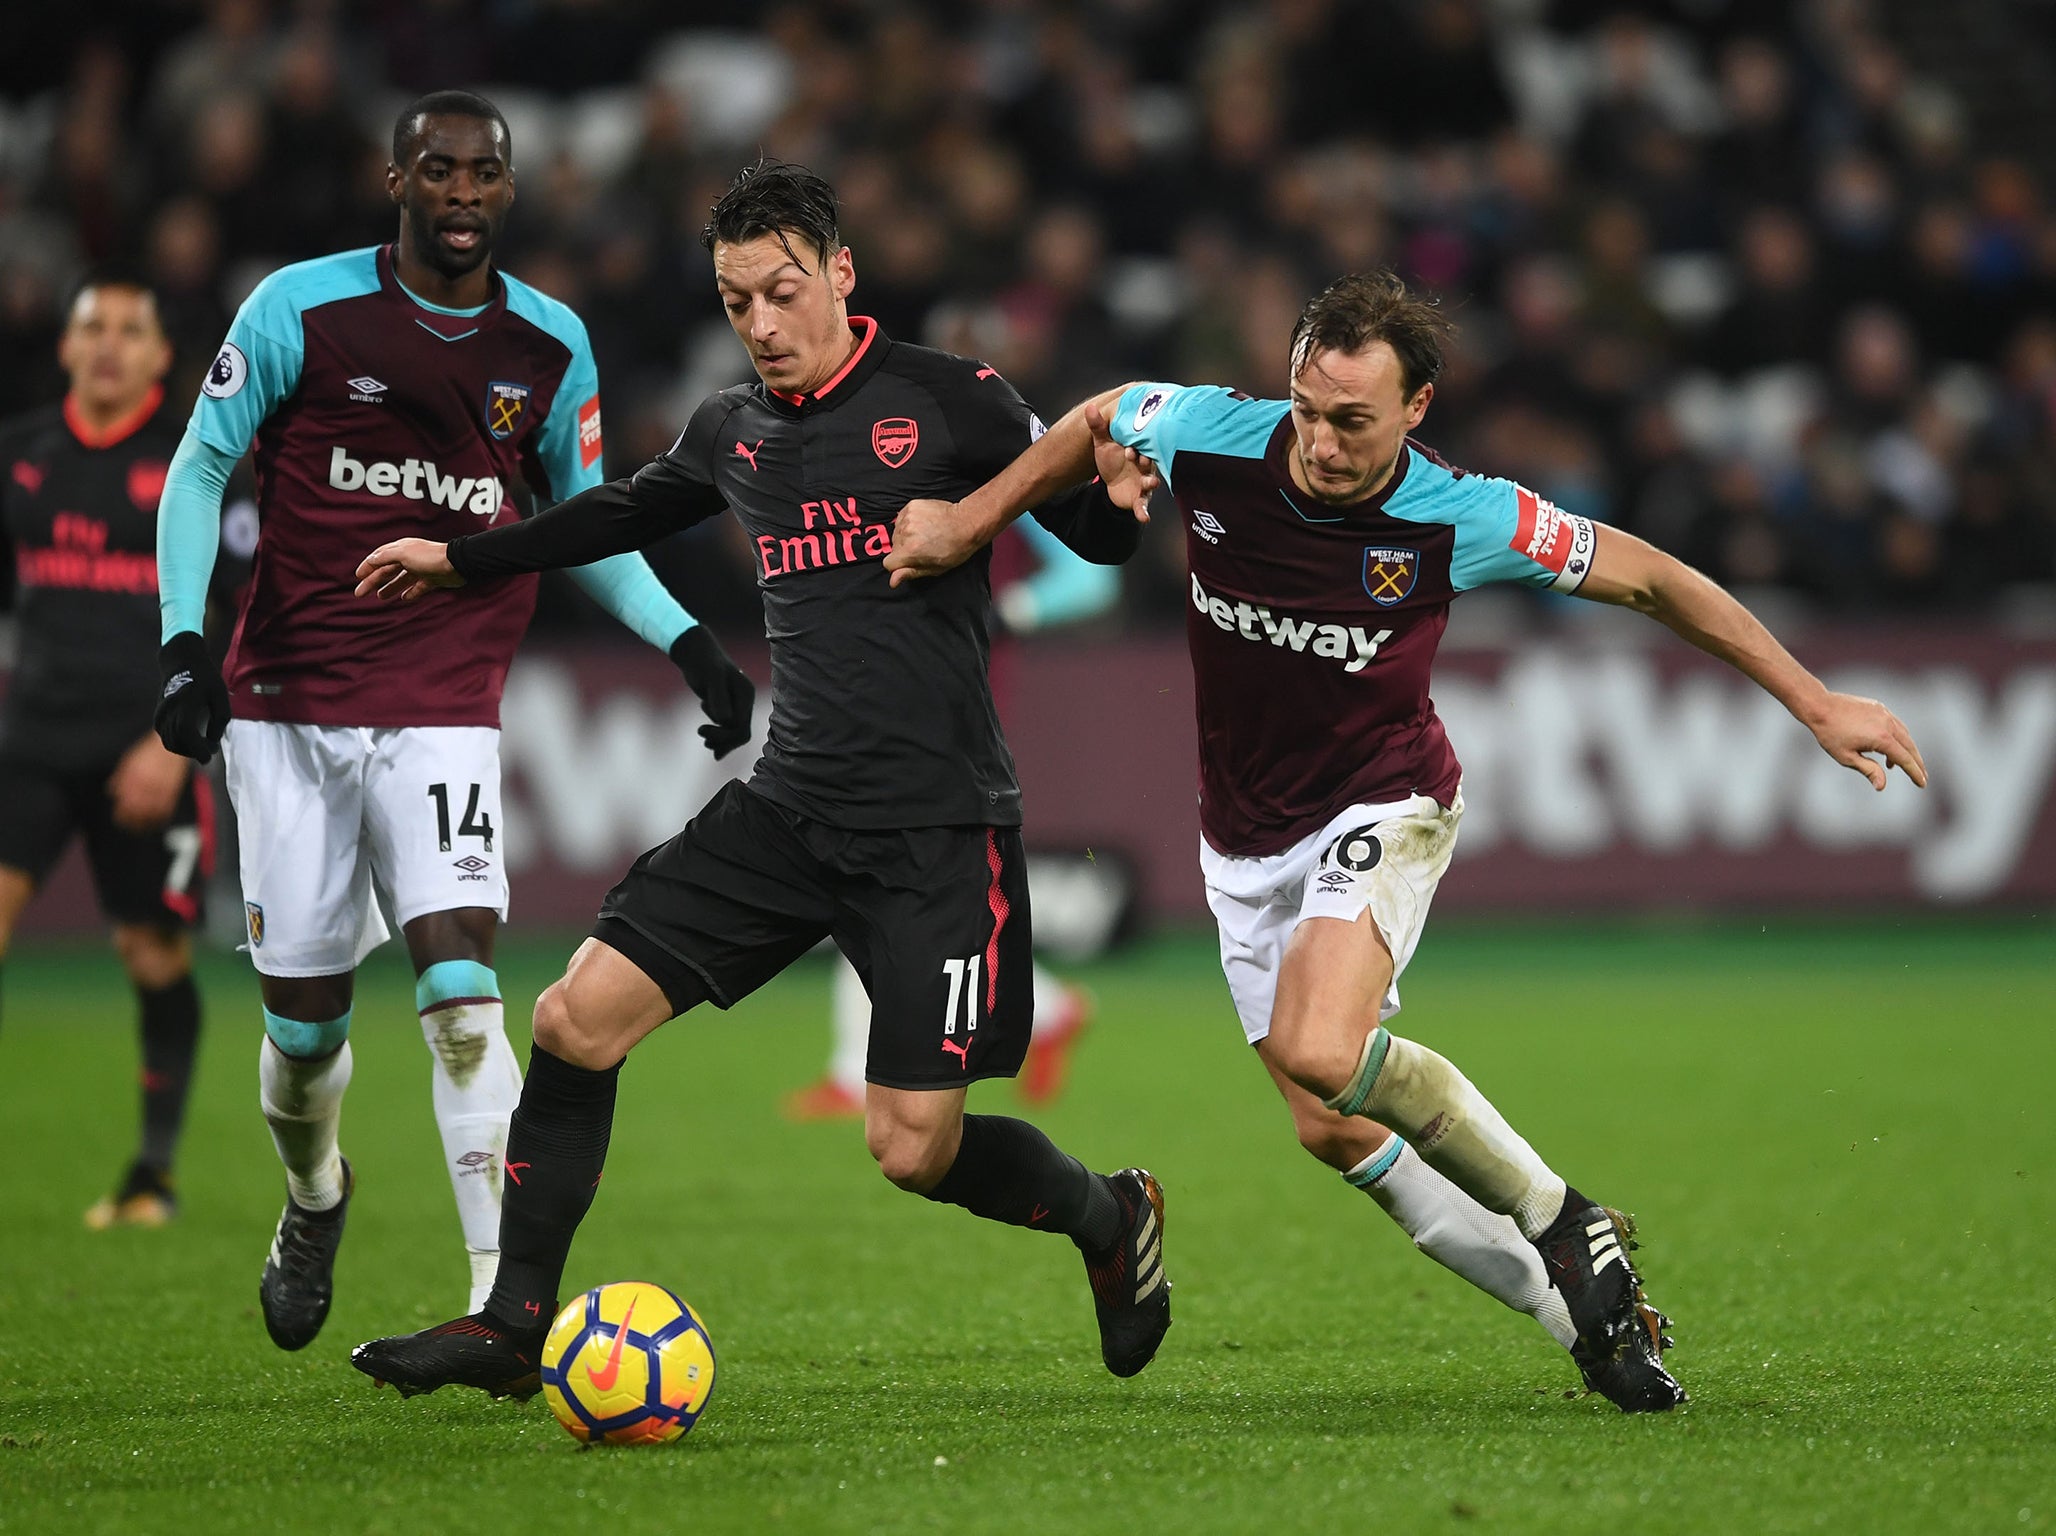 West Ham held Arsenal to a goalless draw